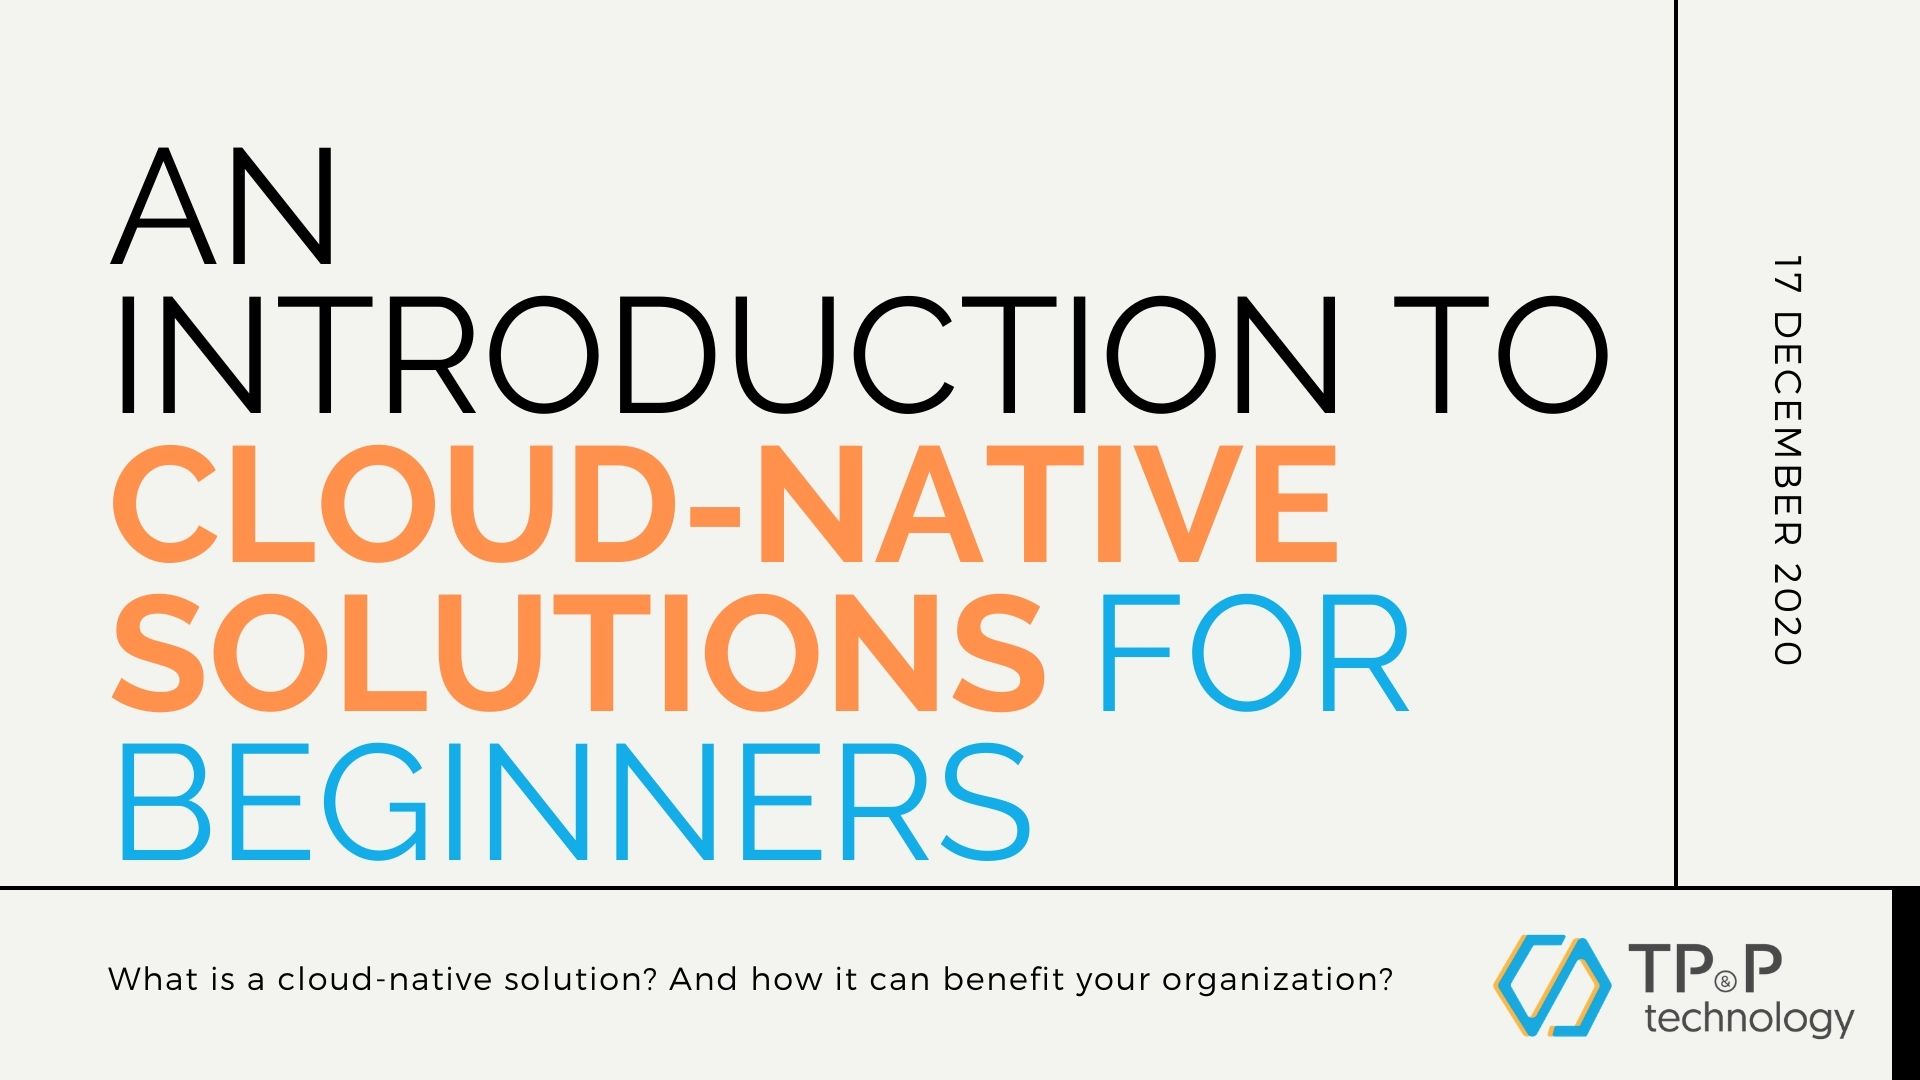 An Introduction To Cloud-Native Solutions For Beginners